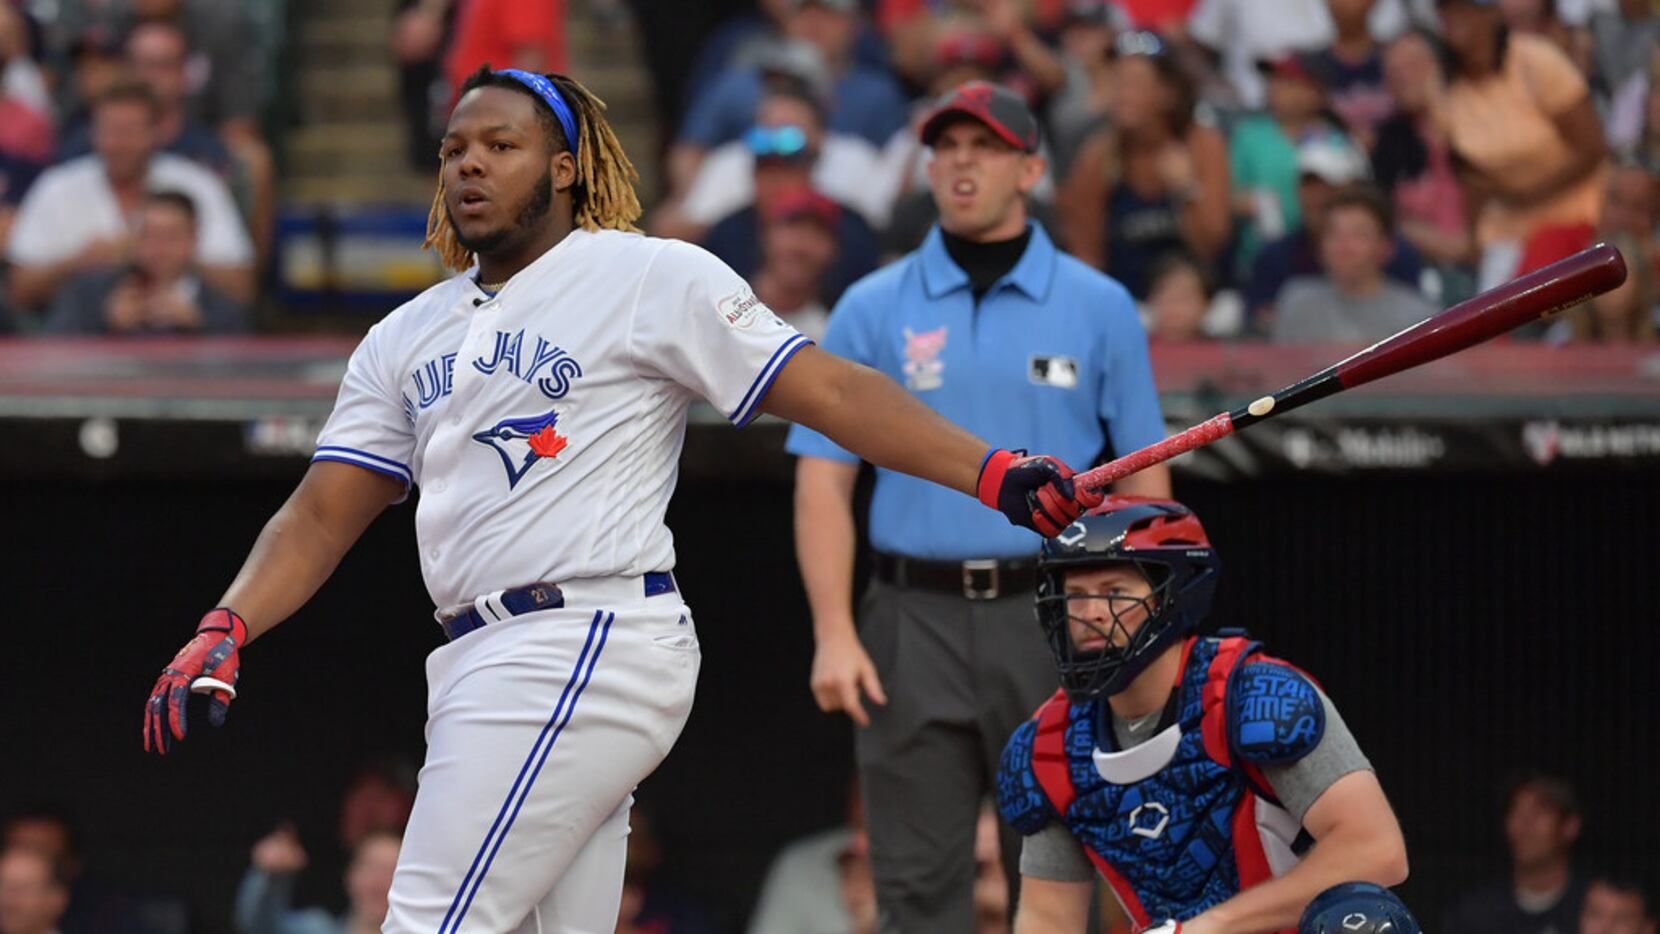 CLEVELAND, OHIO - JULY 08: Vladimir Guerrero Jr. of the Toronto Blue Jays competes in the...